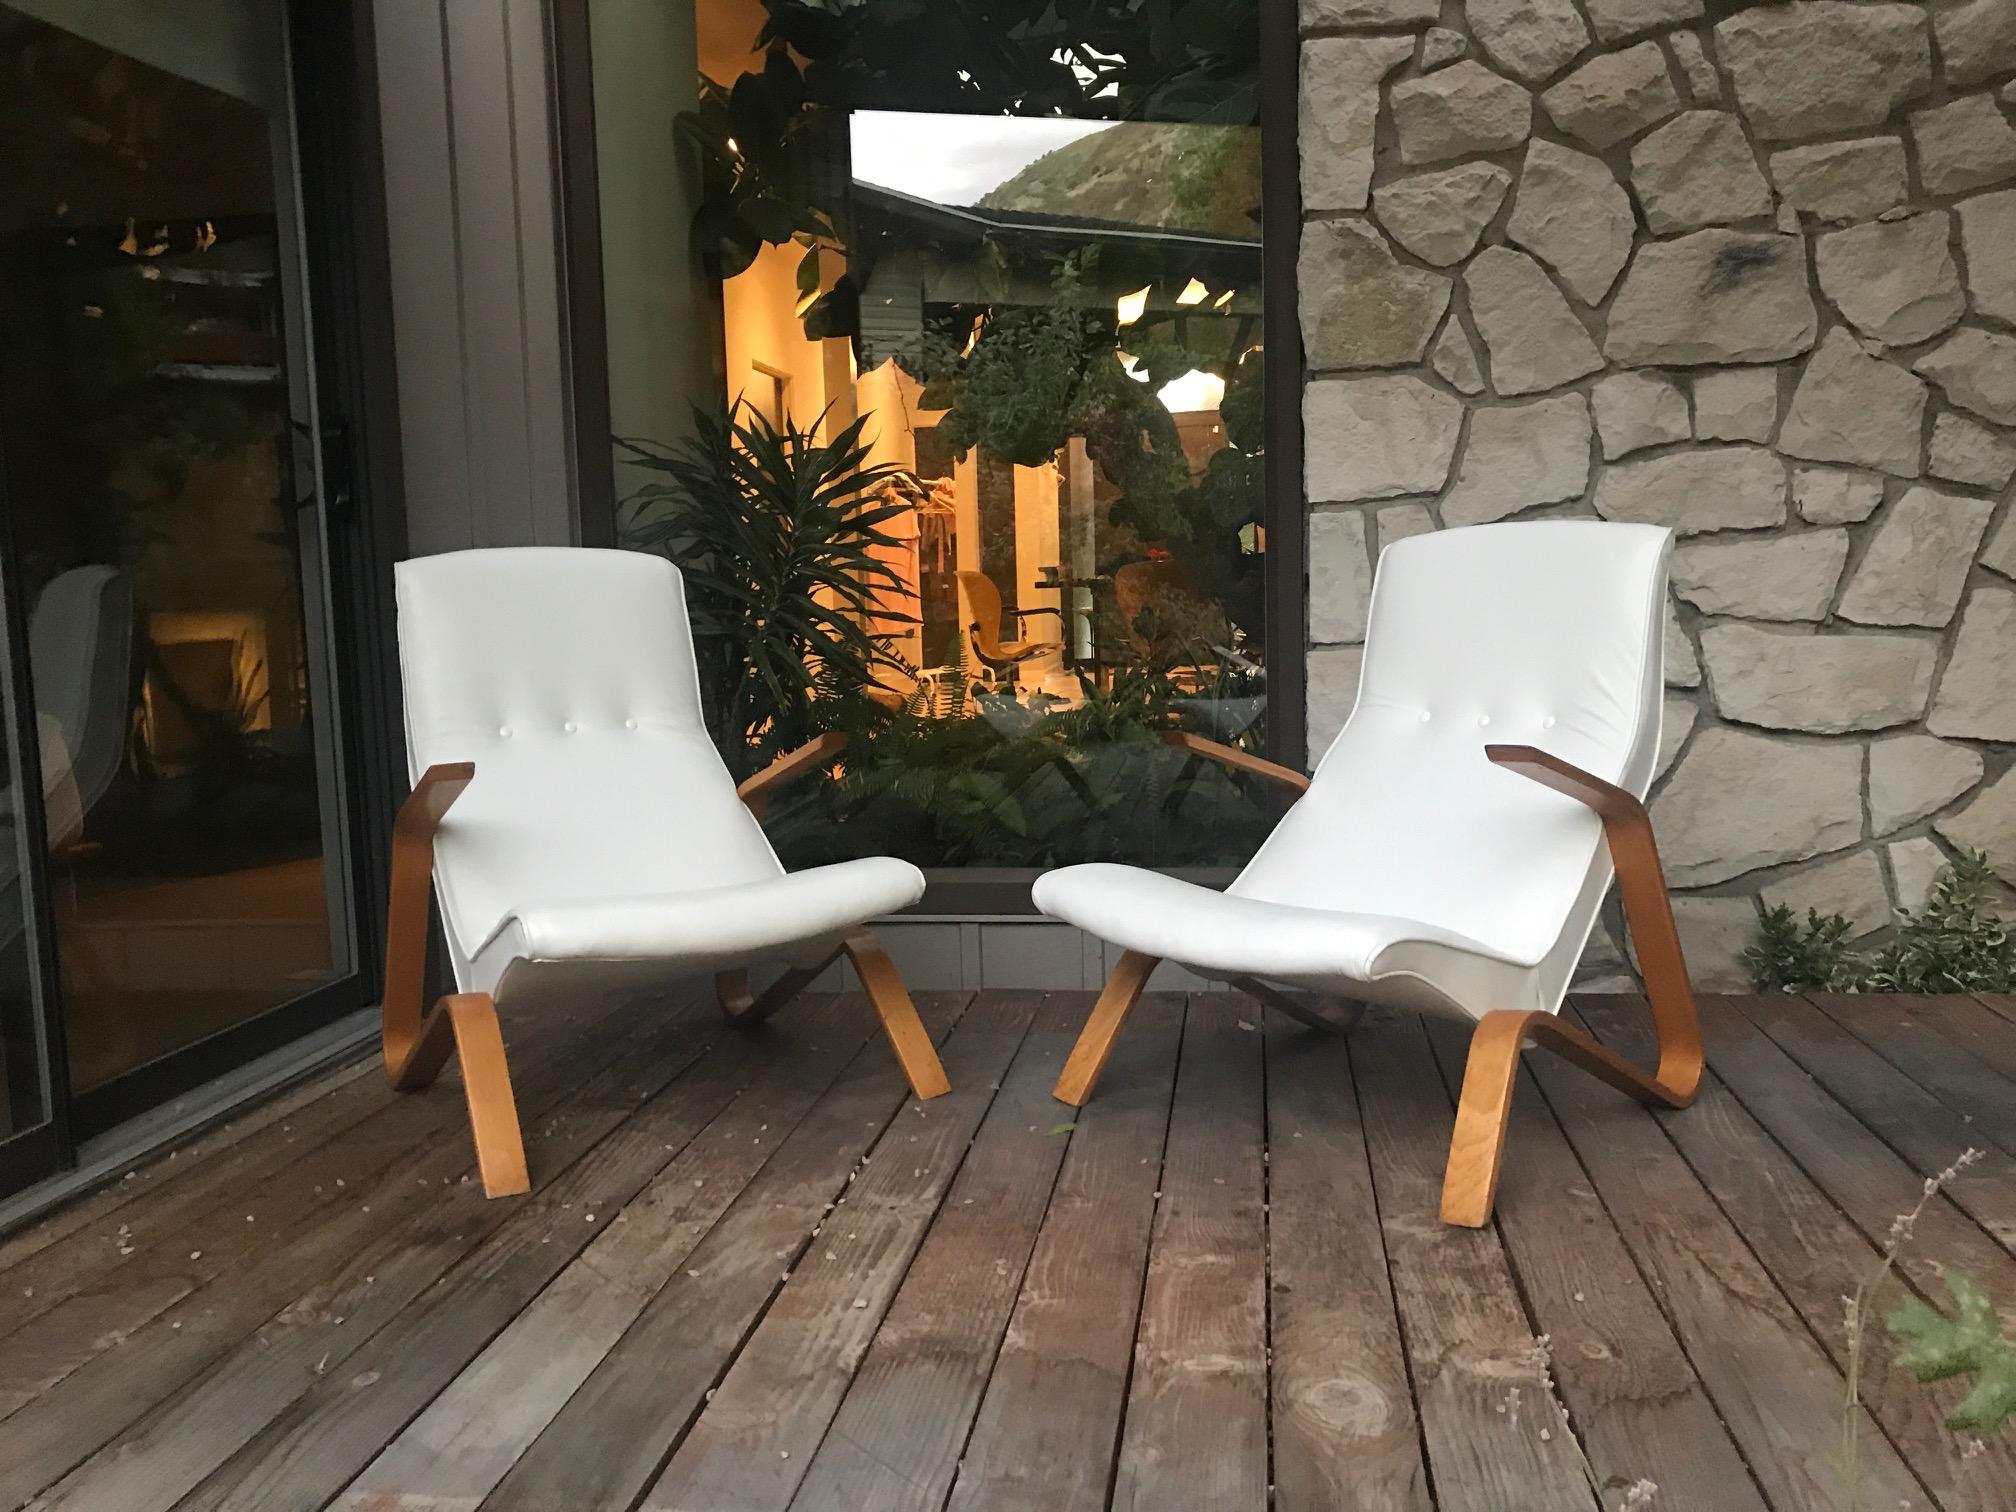 Mid-20th Century Vintage Pair of White Leather Eero Saarinen Grasshopper Lounge Chairs for Knoll